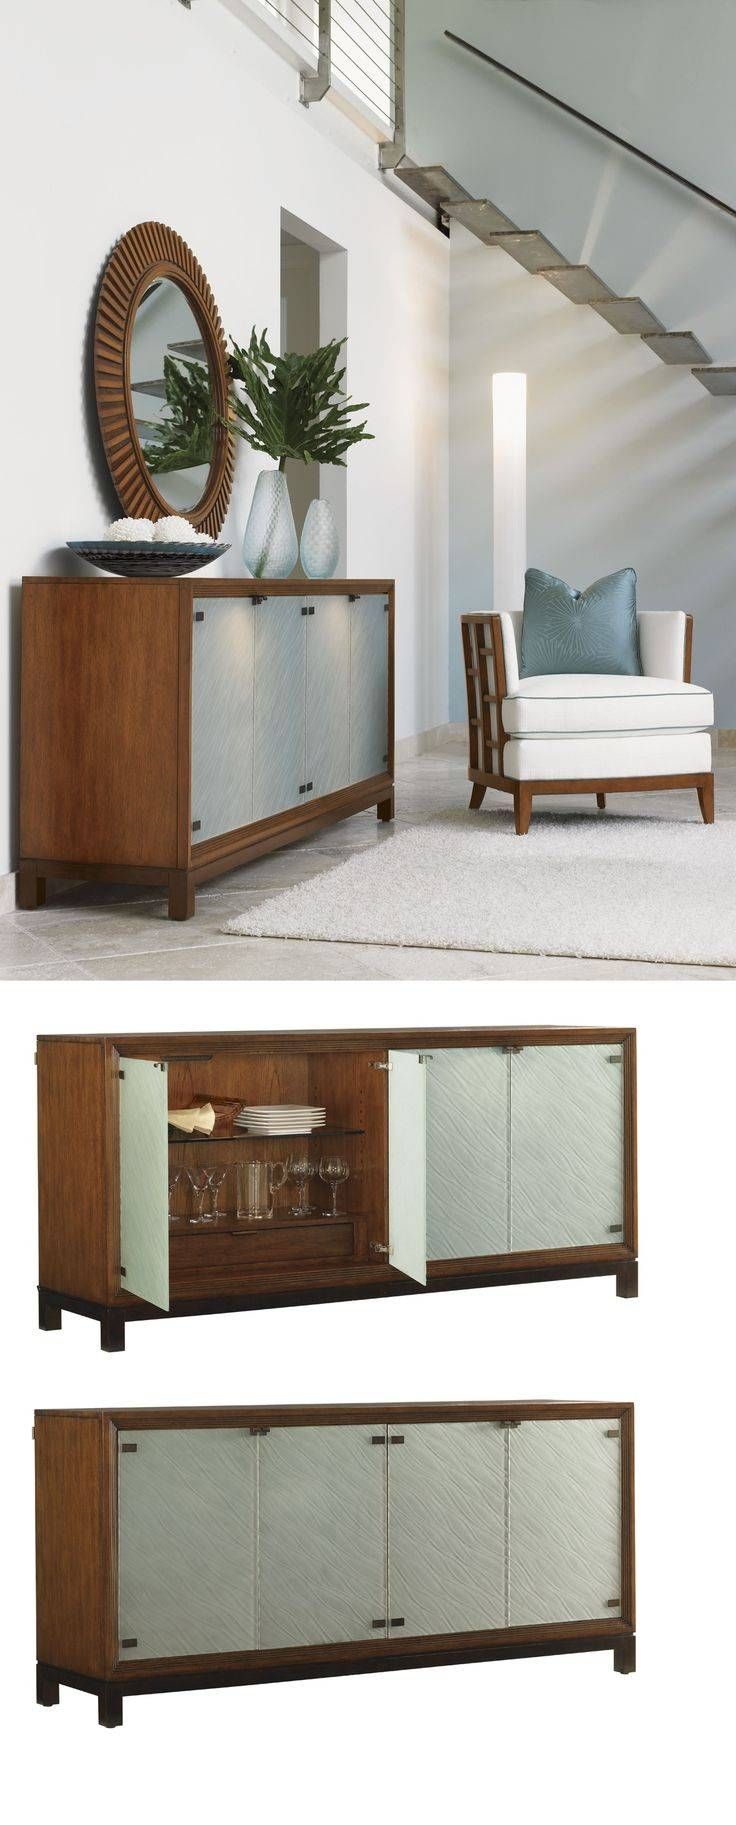 Top 25+ Best Buffet Server Ideas On Pinterest | Buffet Server With Living Room Sideboard (View 8 of 20)